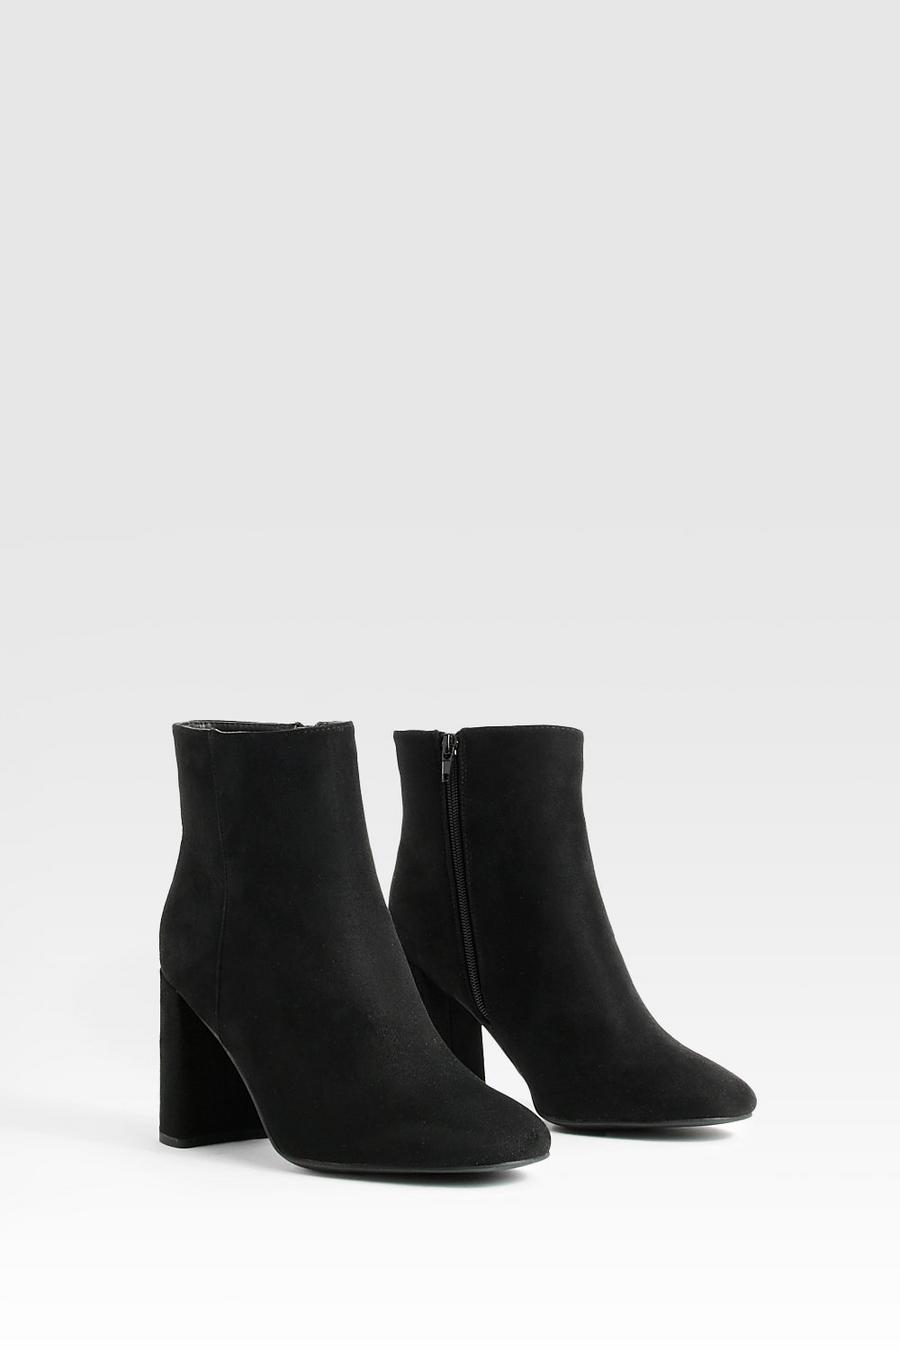 Black Wide Width Round Toe Block Heel Faux Suede Ankle Boots image number 1